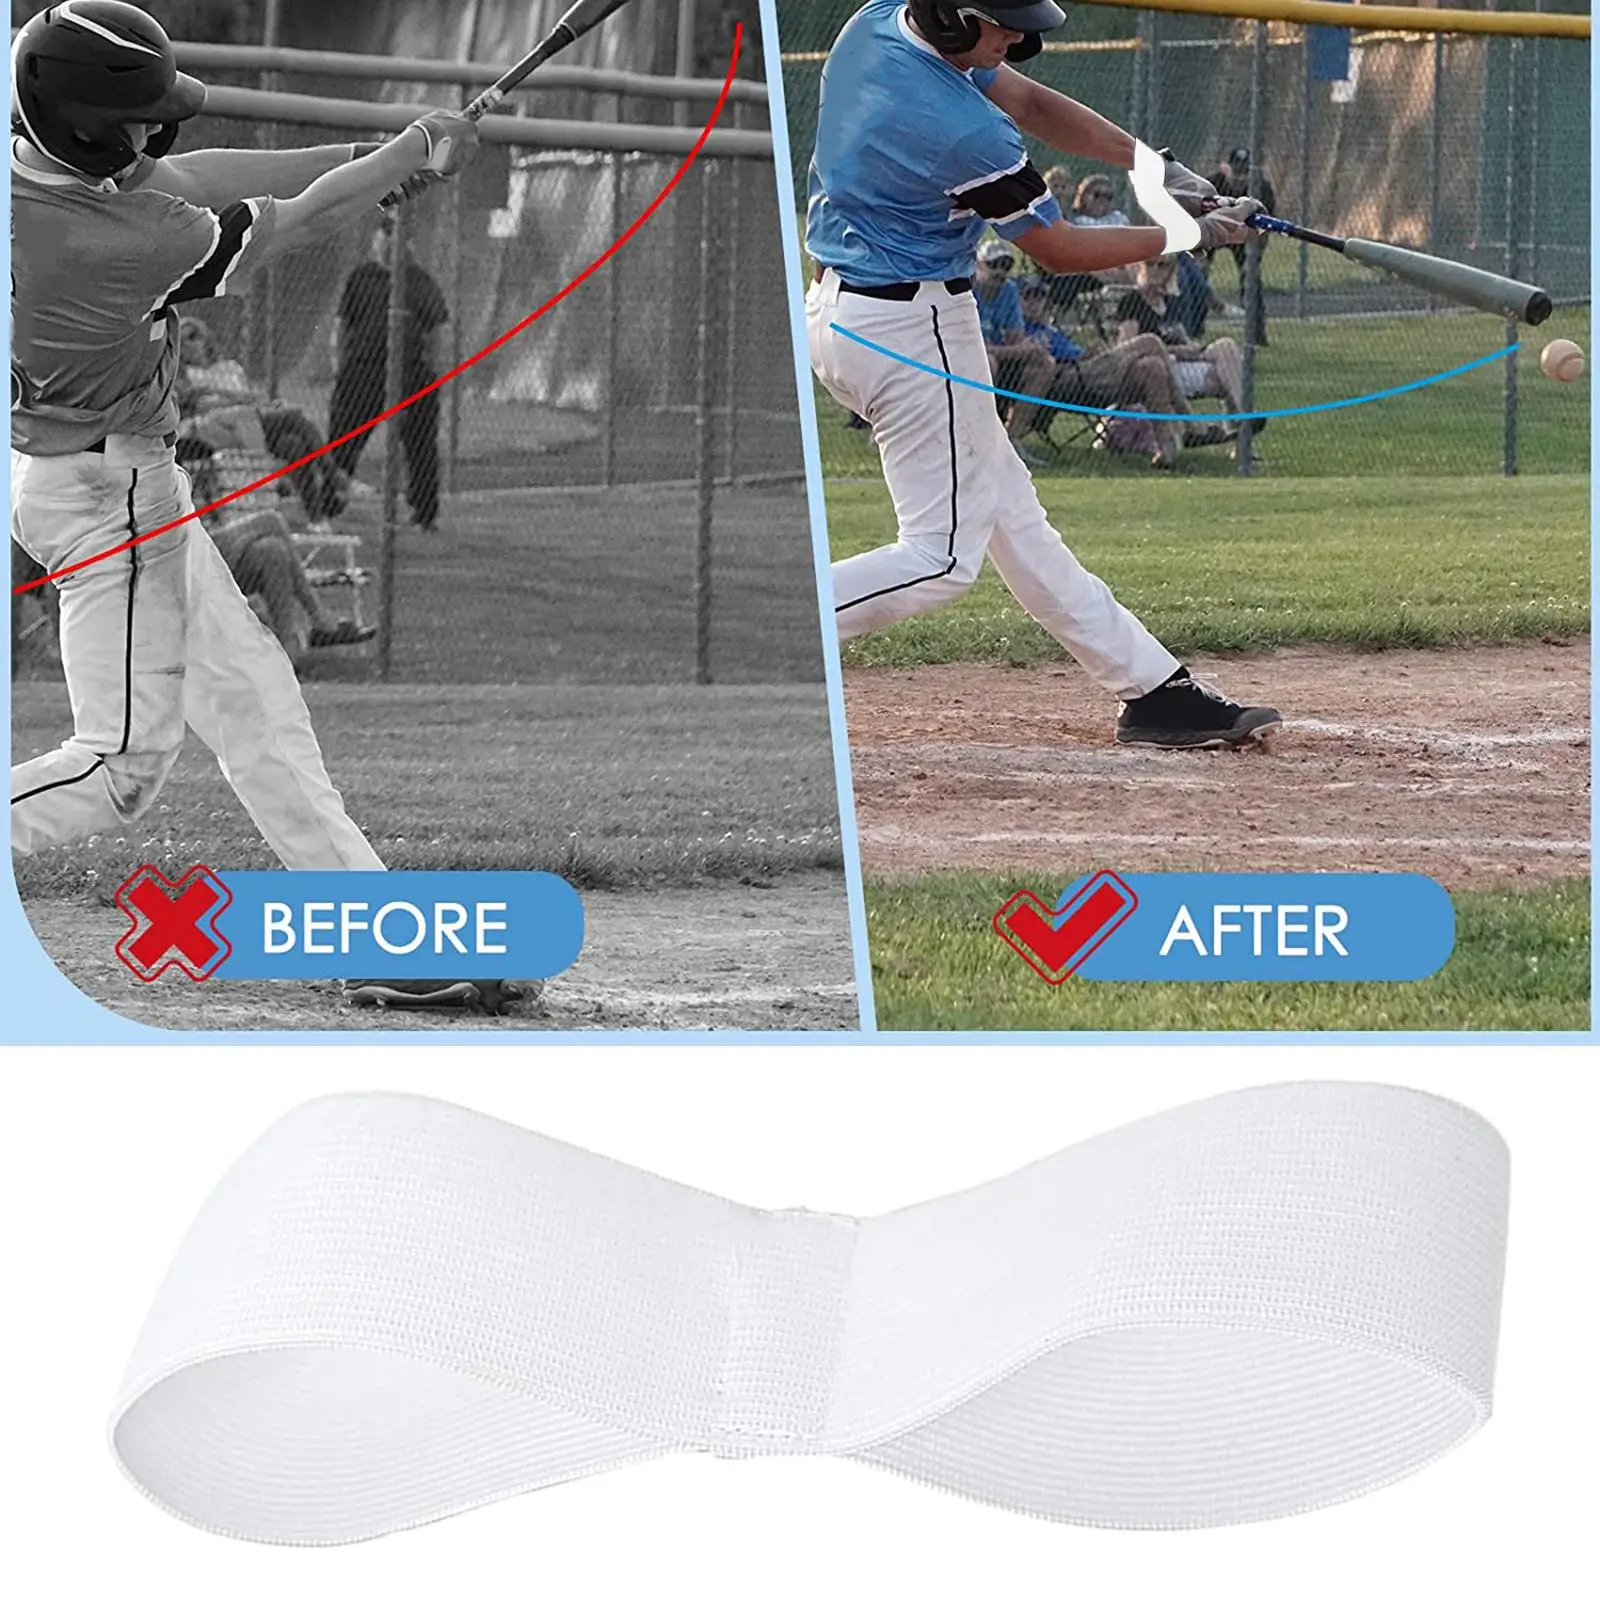 Baseball Swing Trainer Bands Tool Outdoor Sports to Forming Muscle Memory Softball Training Aid for Players Throwing Men Women